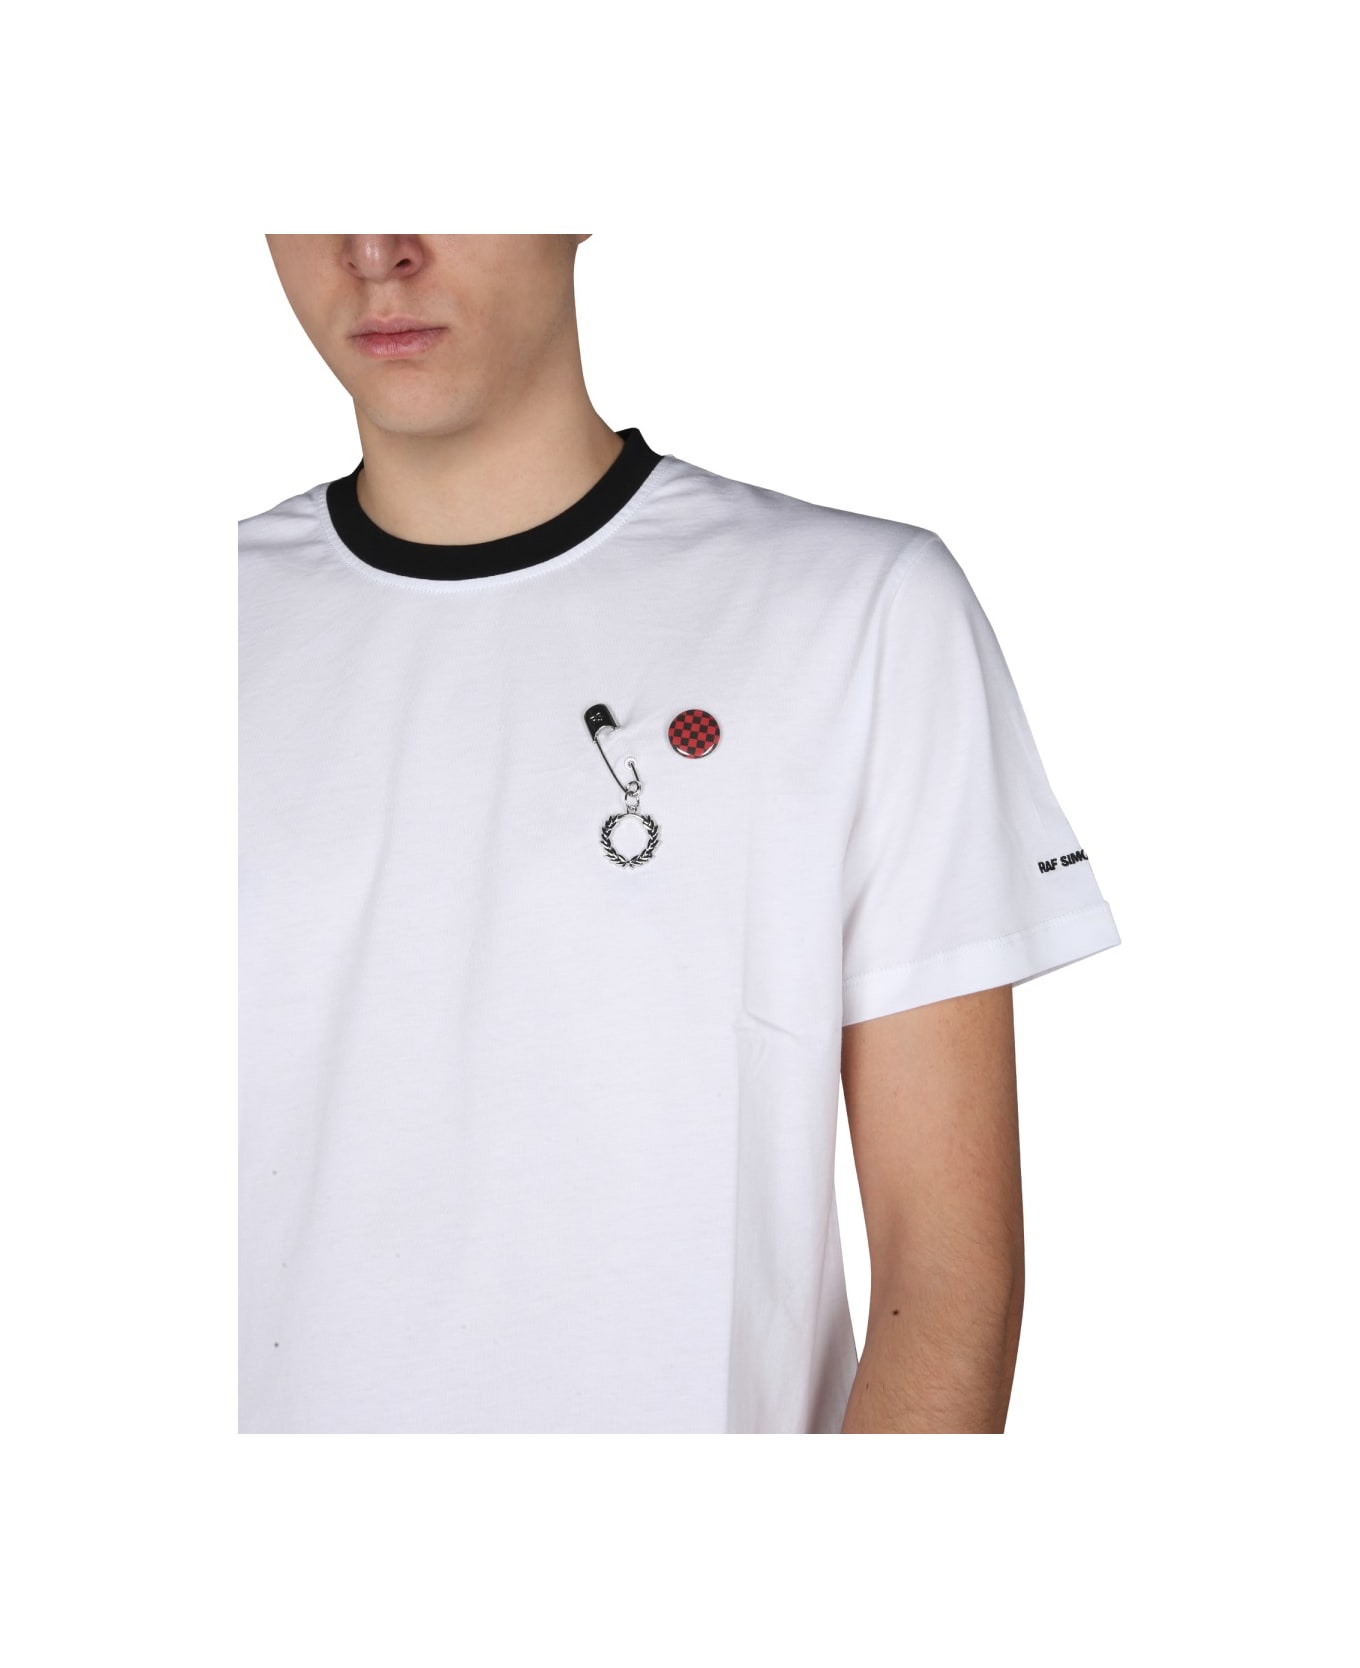 Fred Perry by Raf Simons Slim Fit T-shirt - WHITE